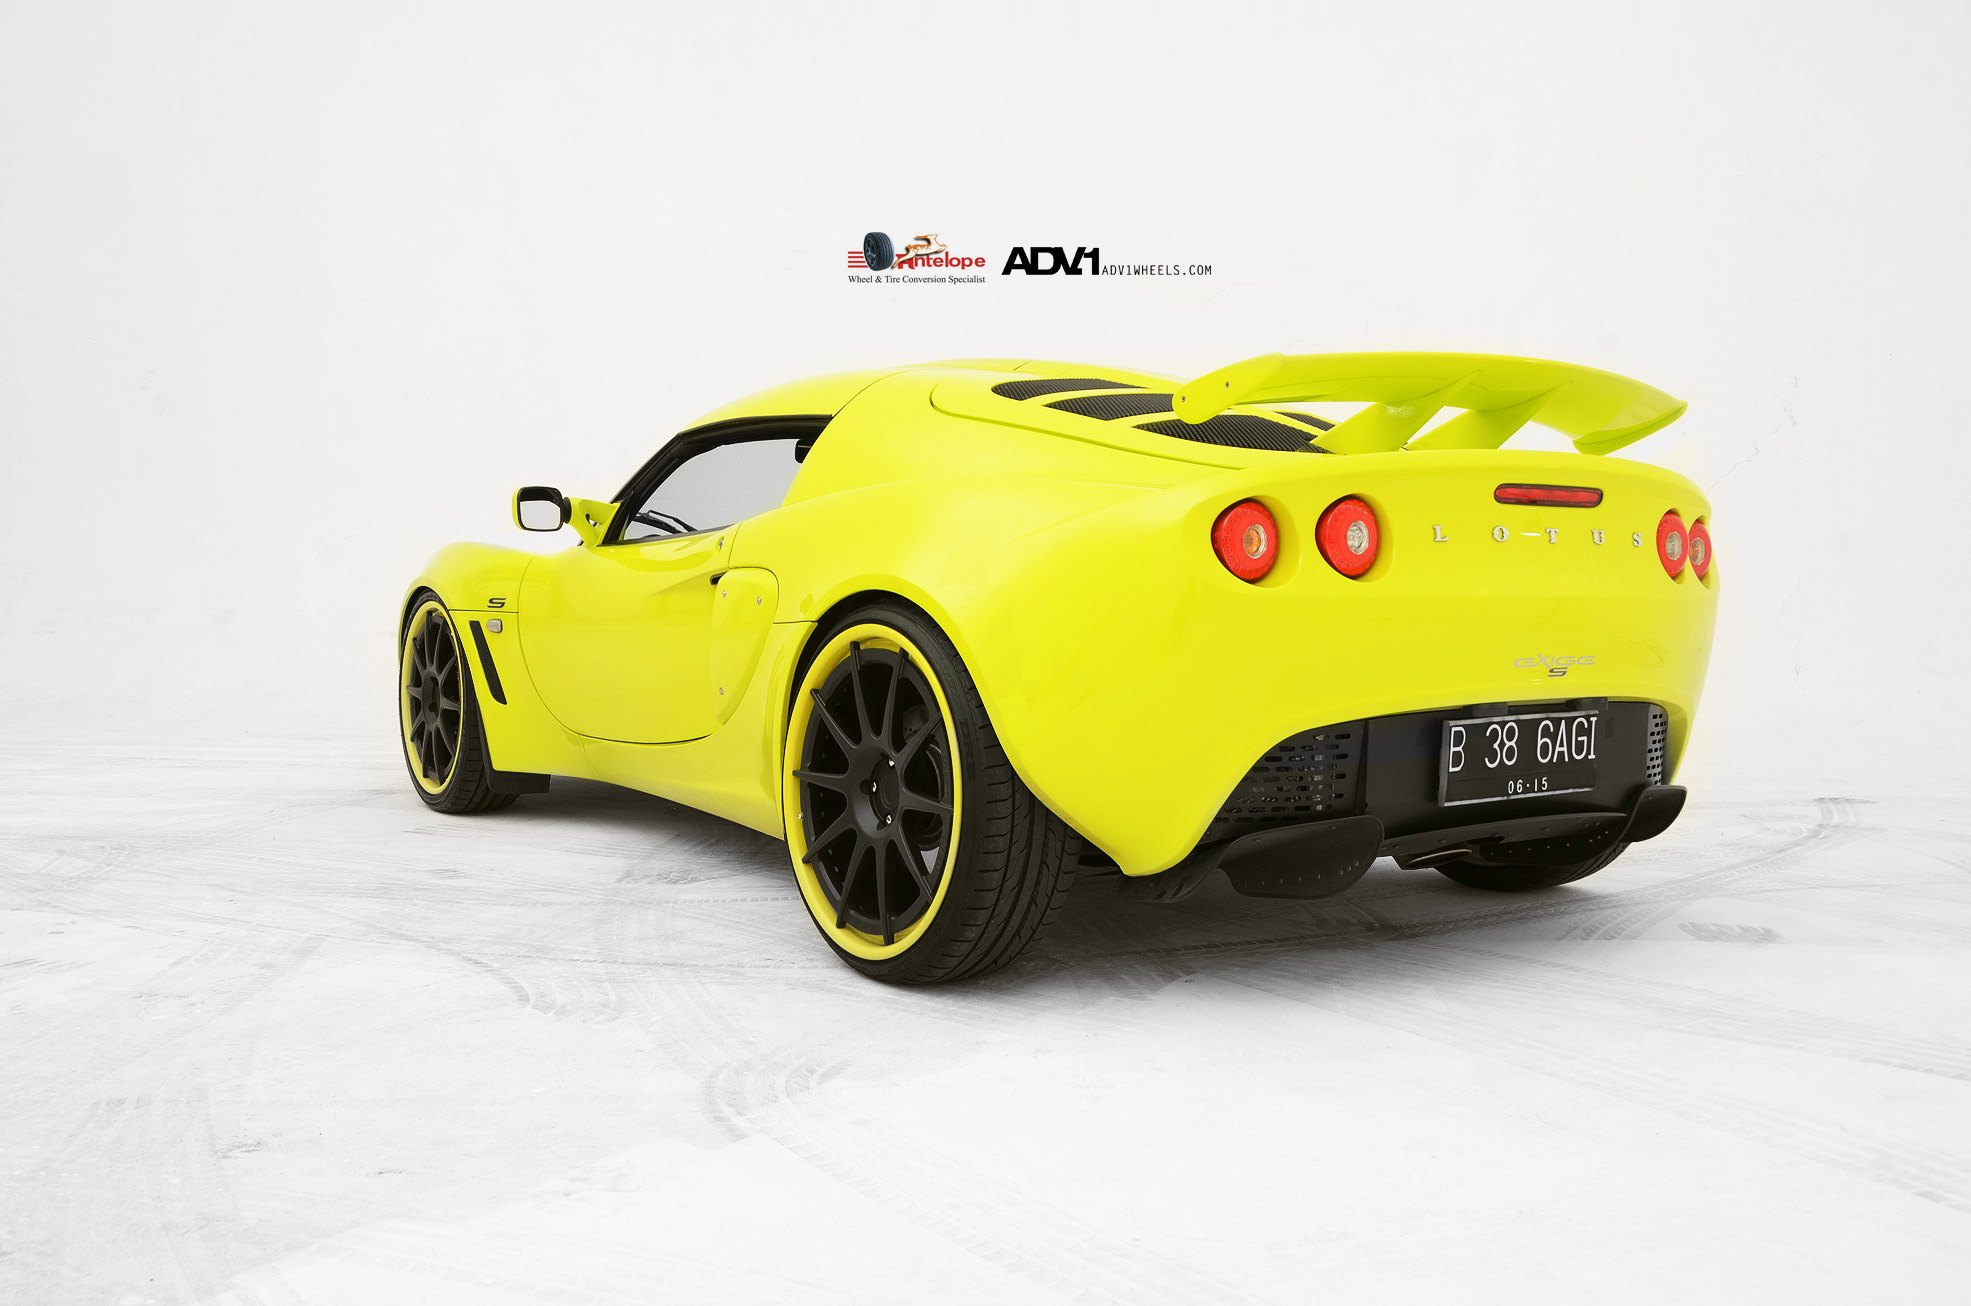 Custom Lotus Exige with Large Wing Spoiler - Photo by ADV.1